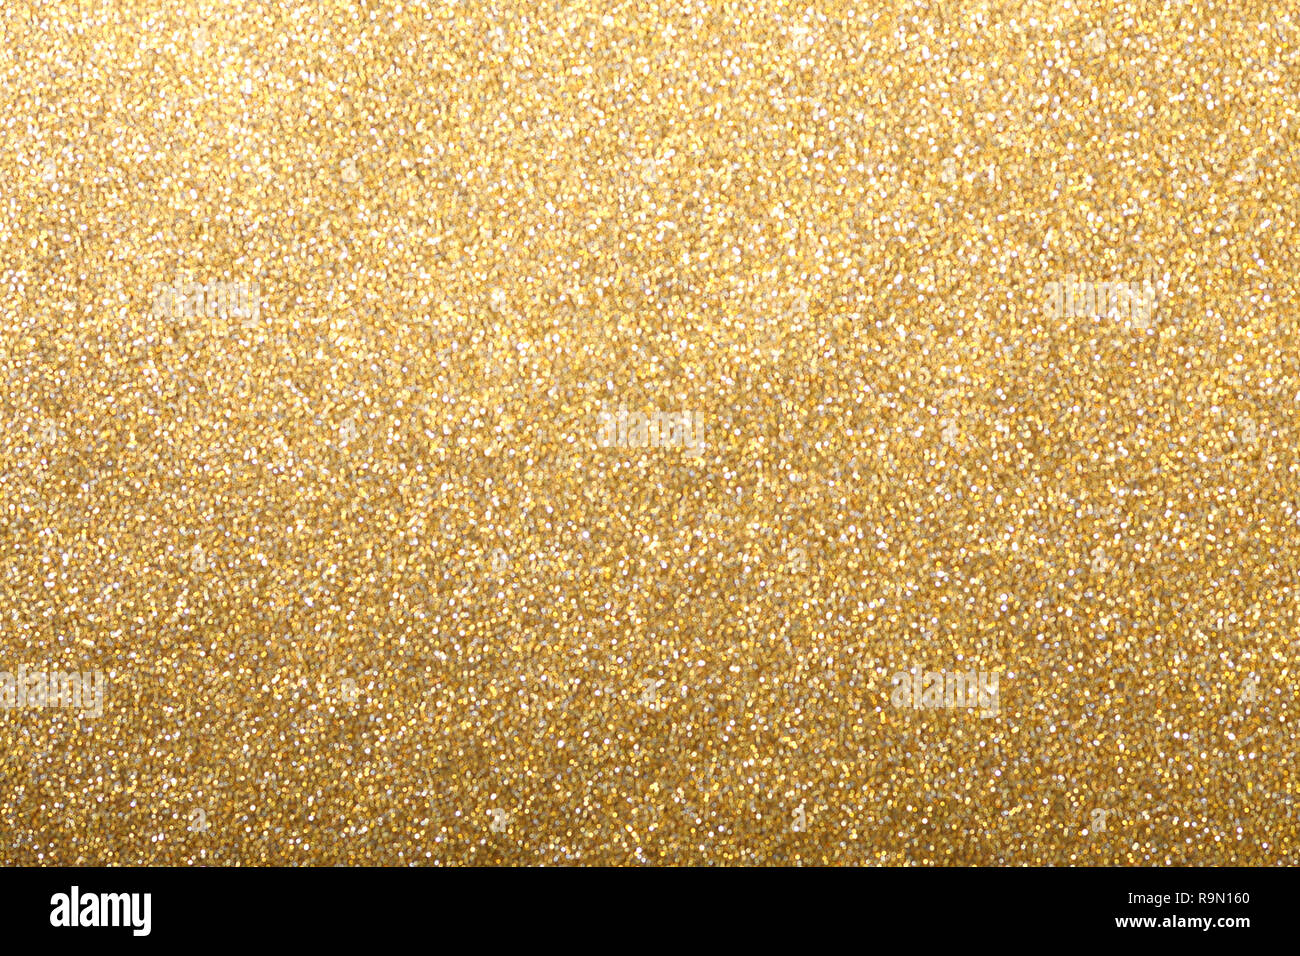 https://c8.alamy.com/comp/R9N160/gold-silver-glitter-background-shiny-wrapping-paper-defocus-R9N160.jpg